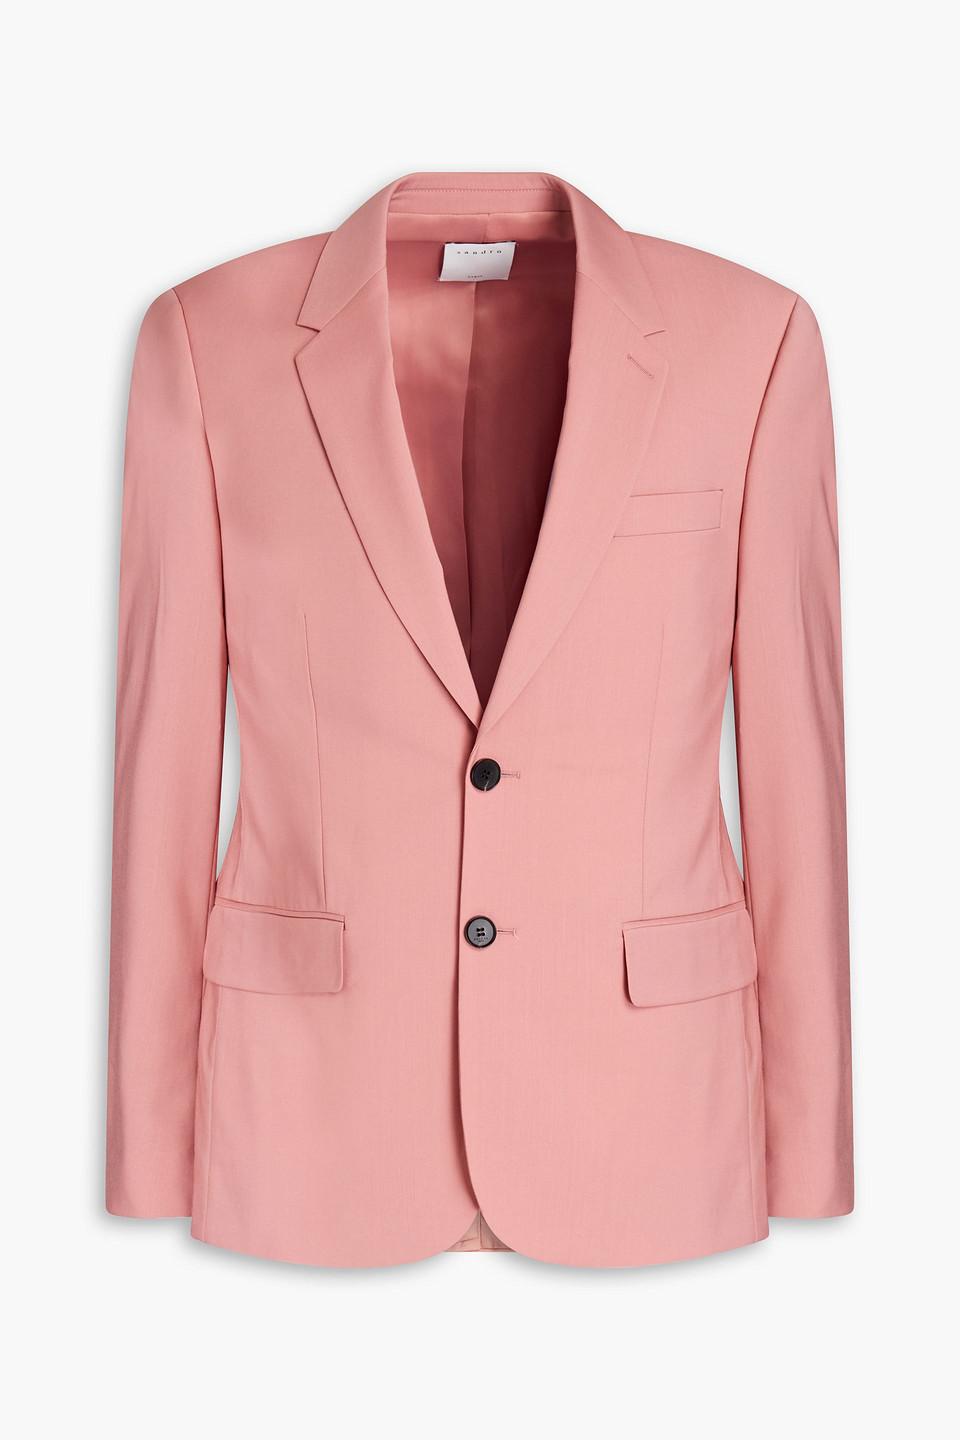 Sandro Wool-crepe Suit Jacket in Pink for Men | Lyst